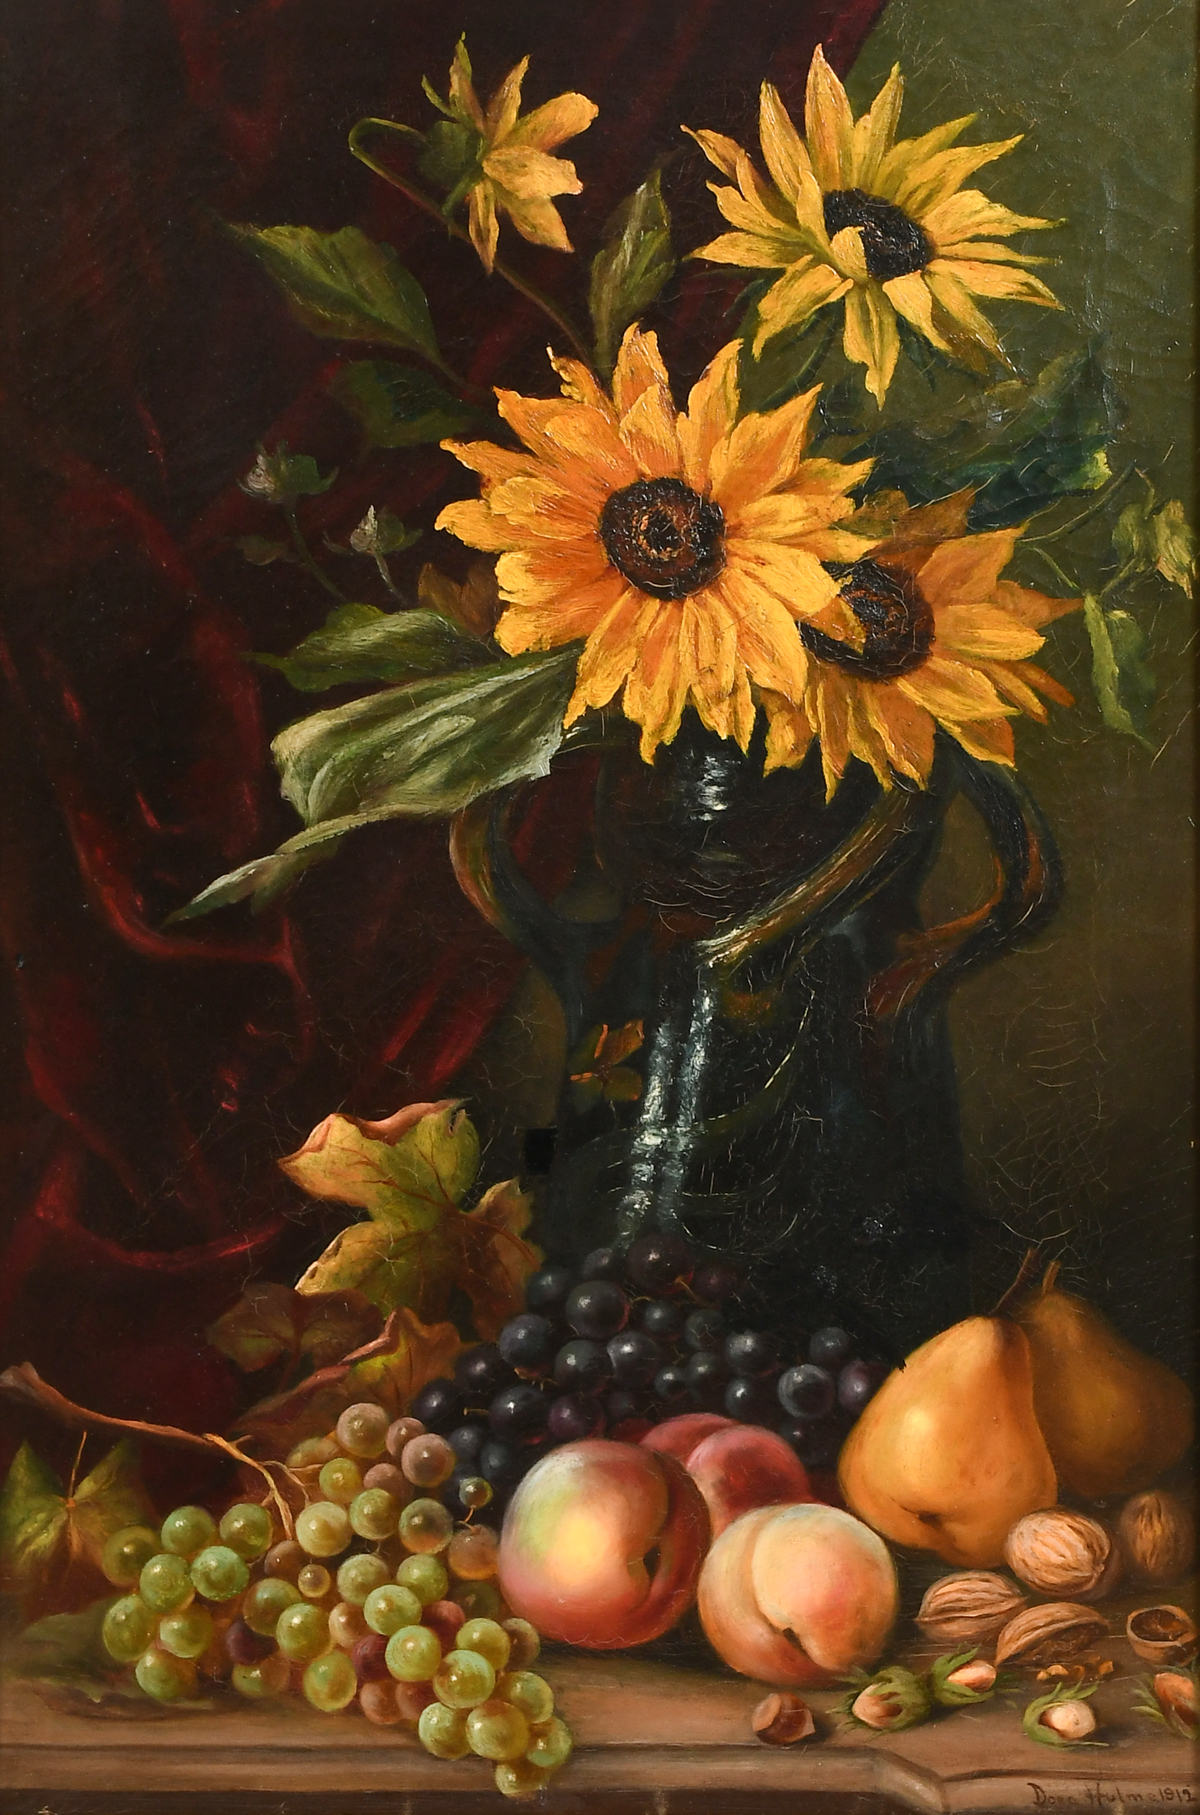 ANTIQUE STILL LIFE PAINTING BY 2ed0be